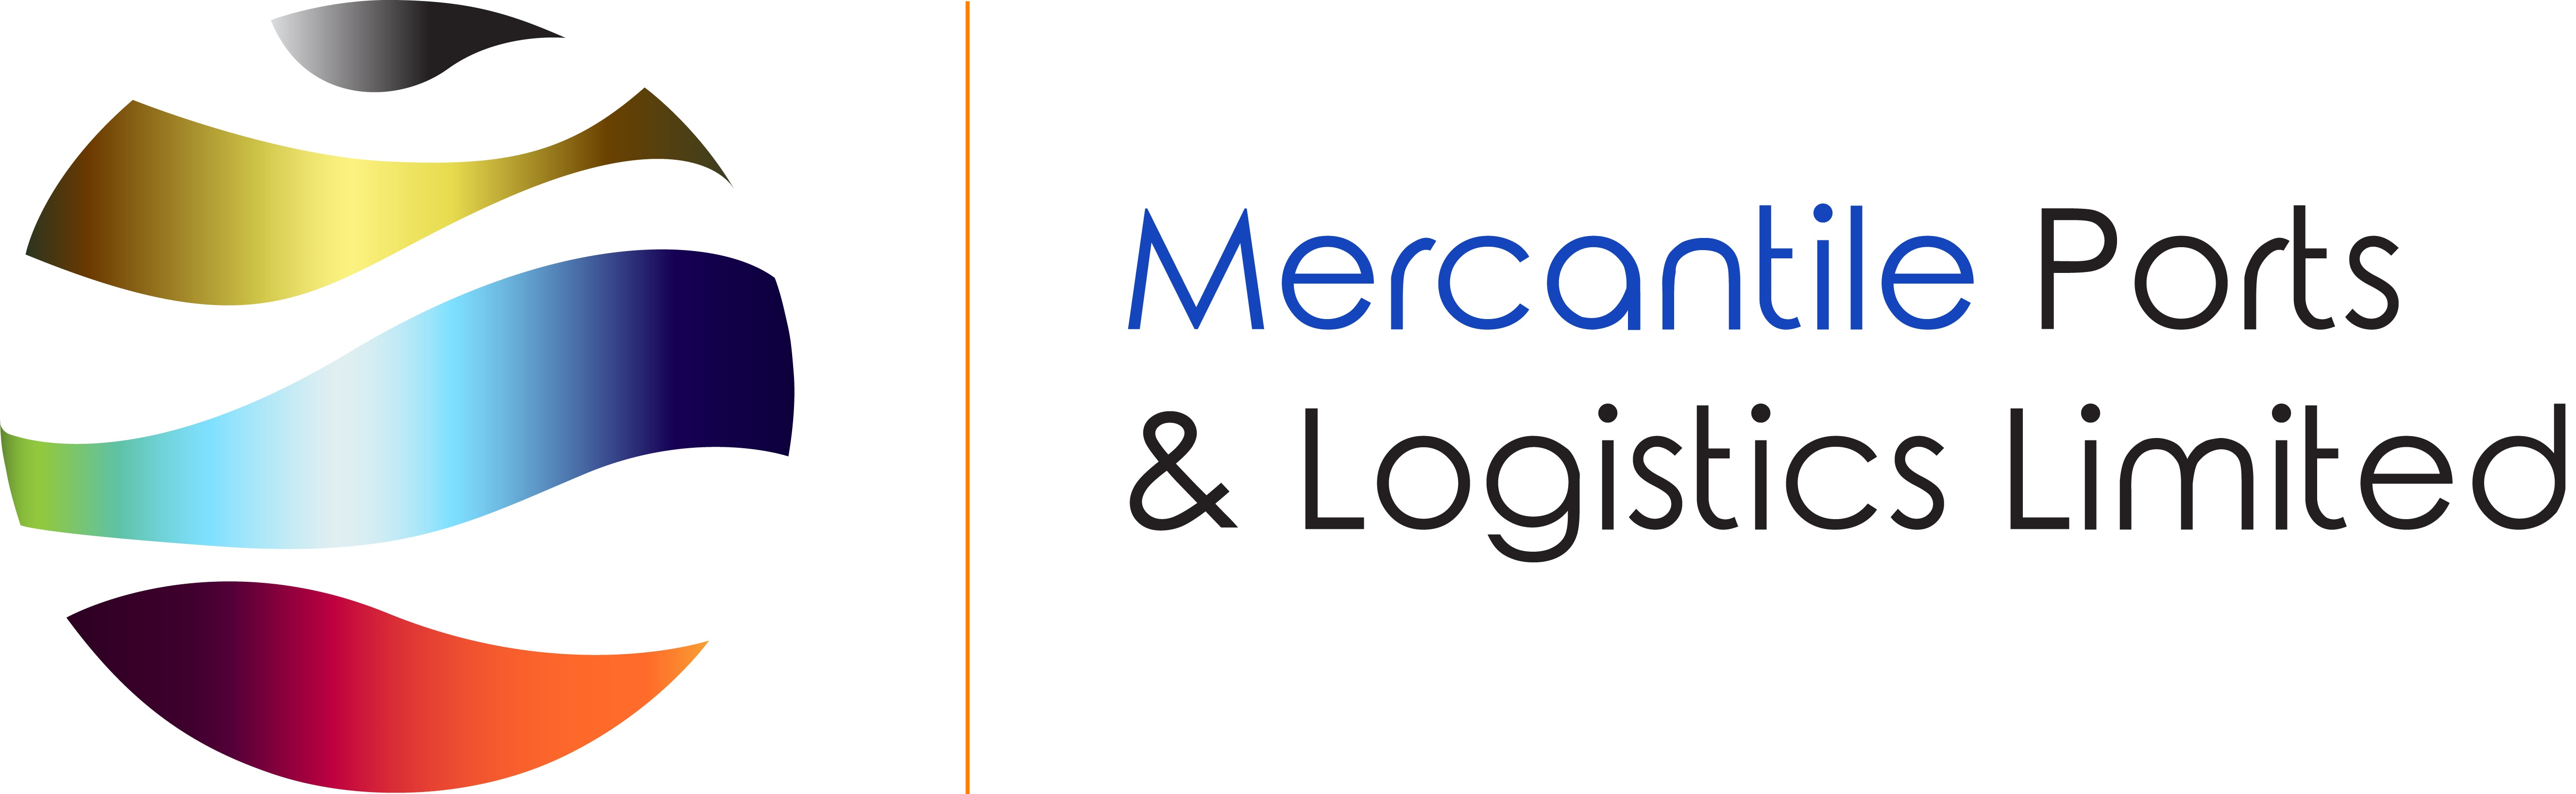 Mercantile Ports and Logistics Limited